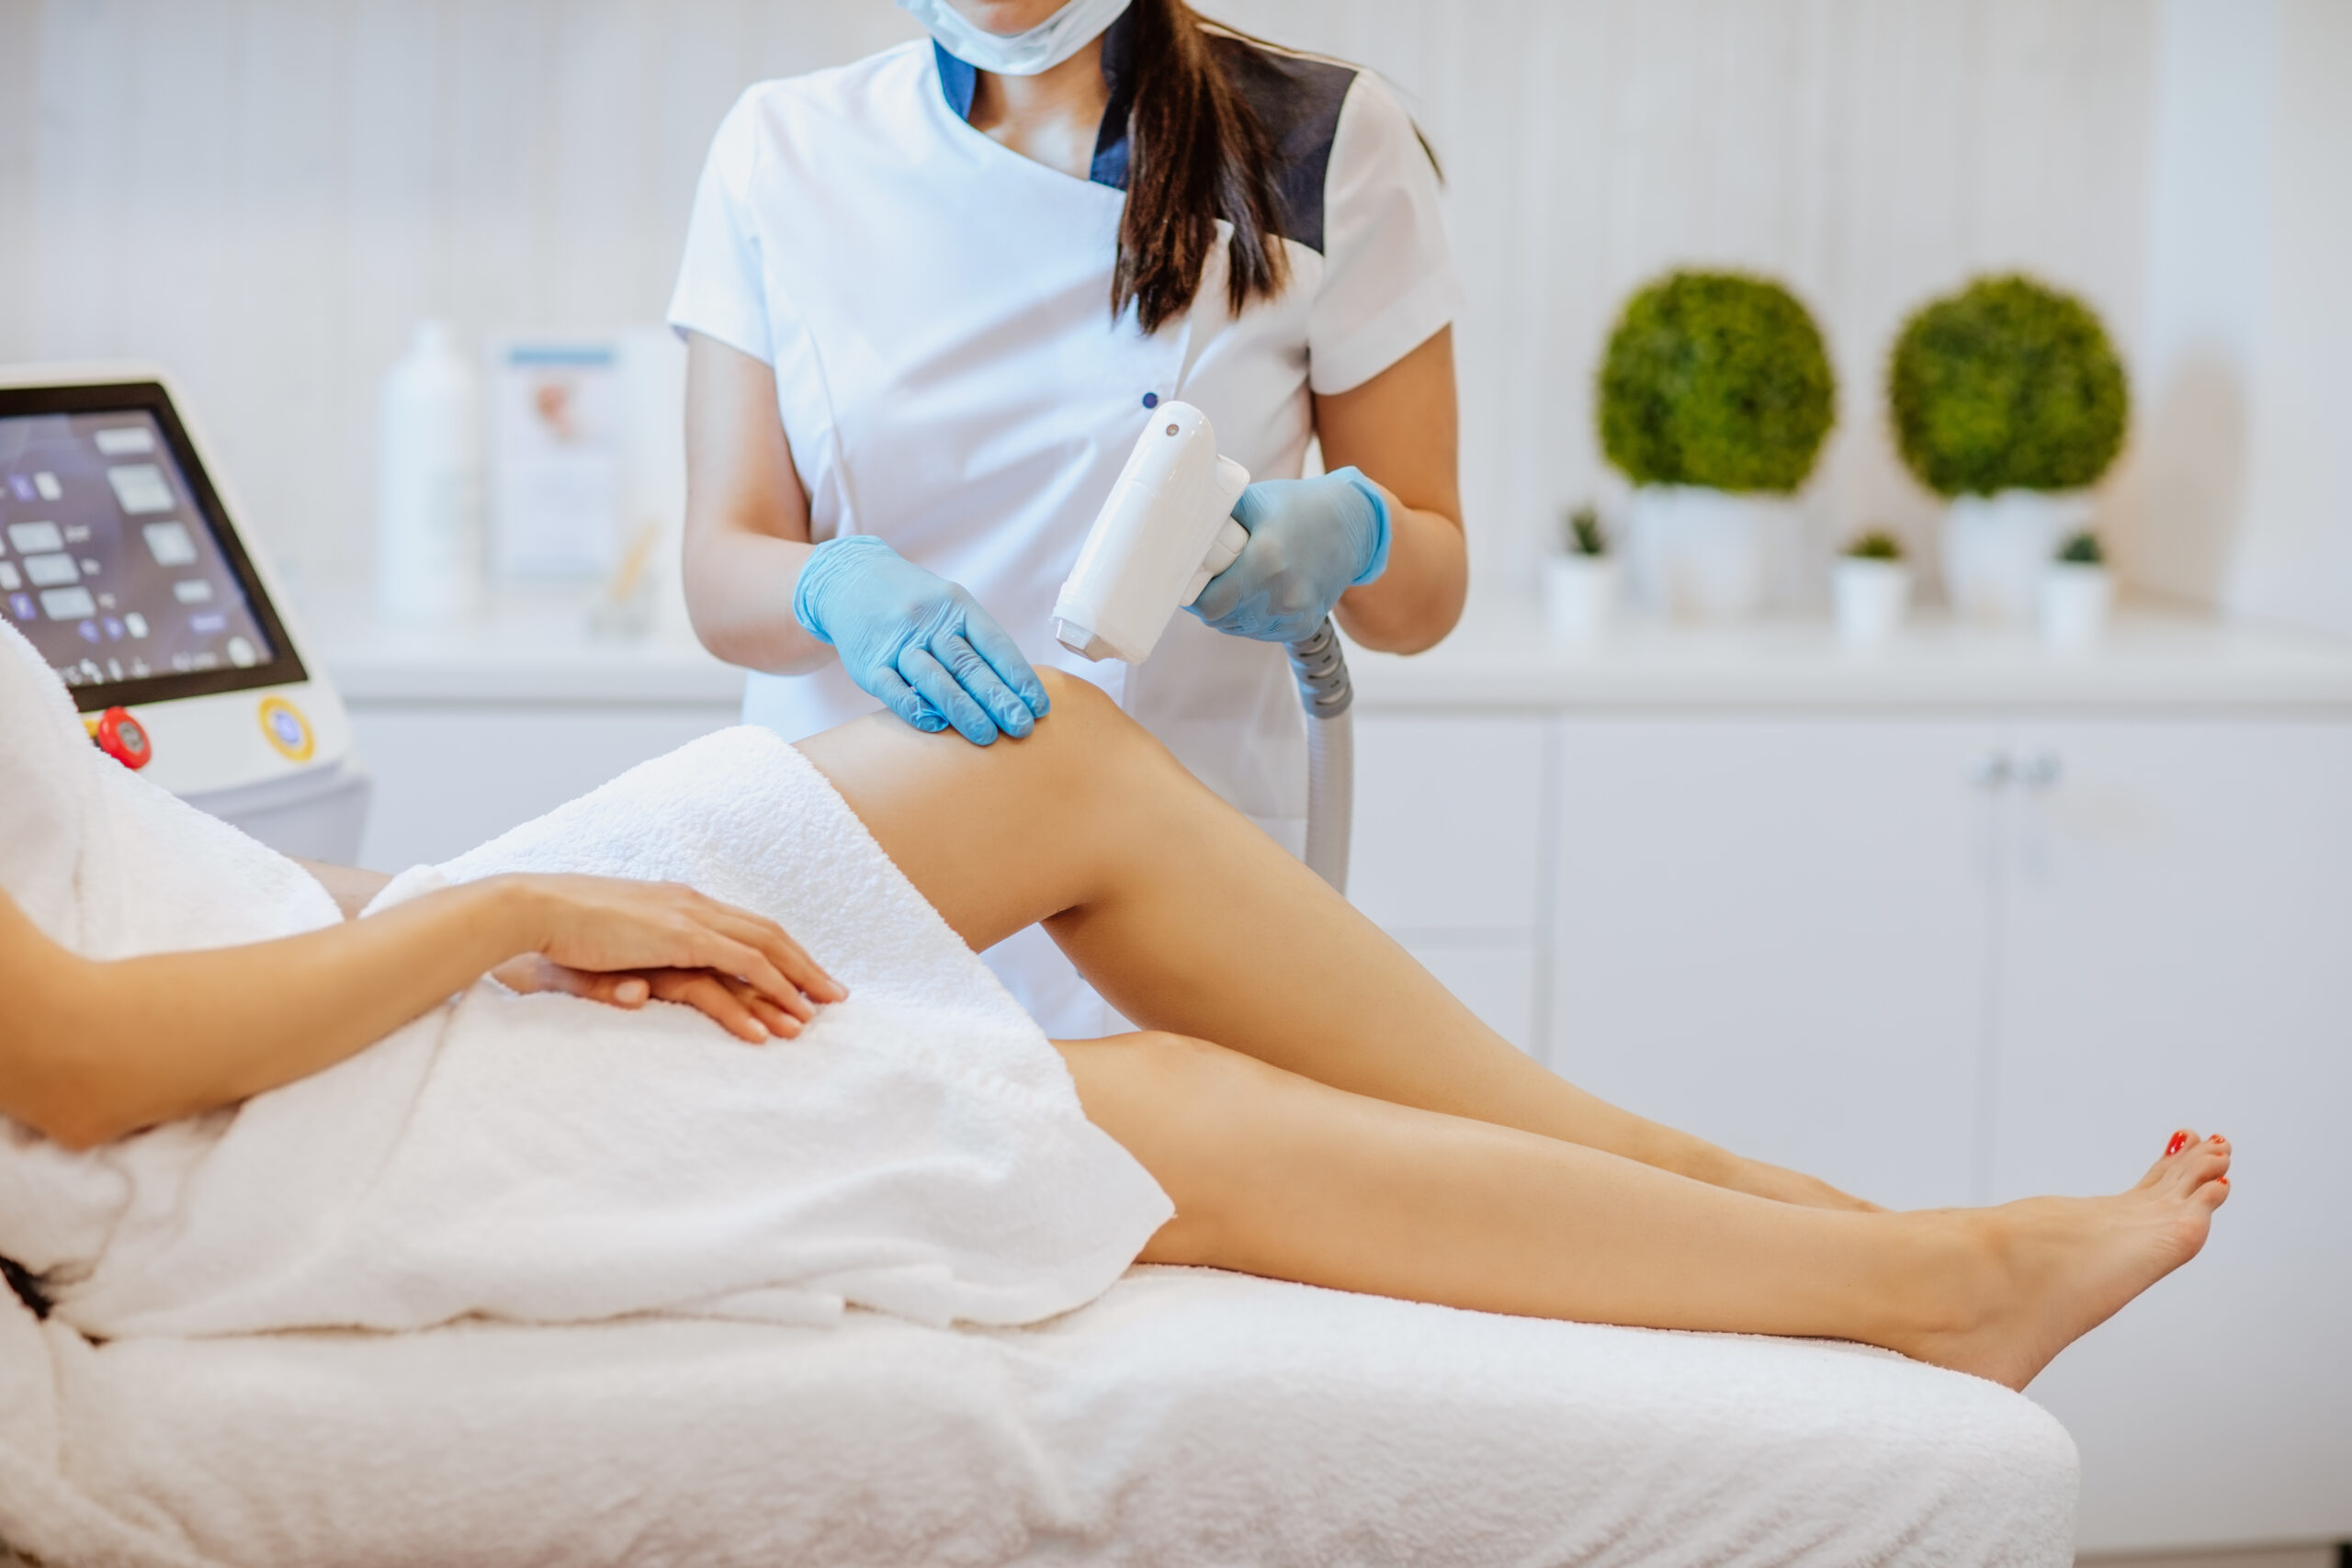 Laser Hair Removal Course - Laser Tech International